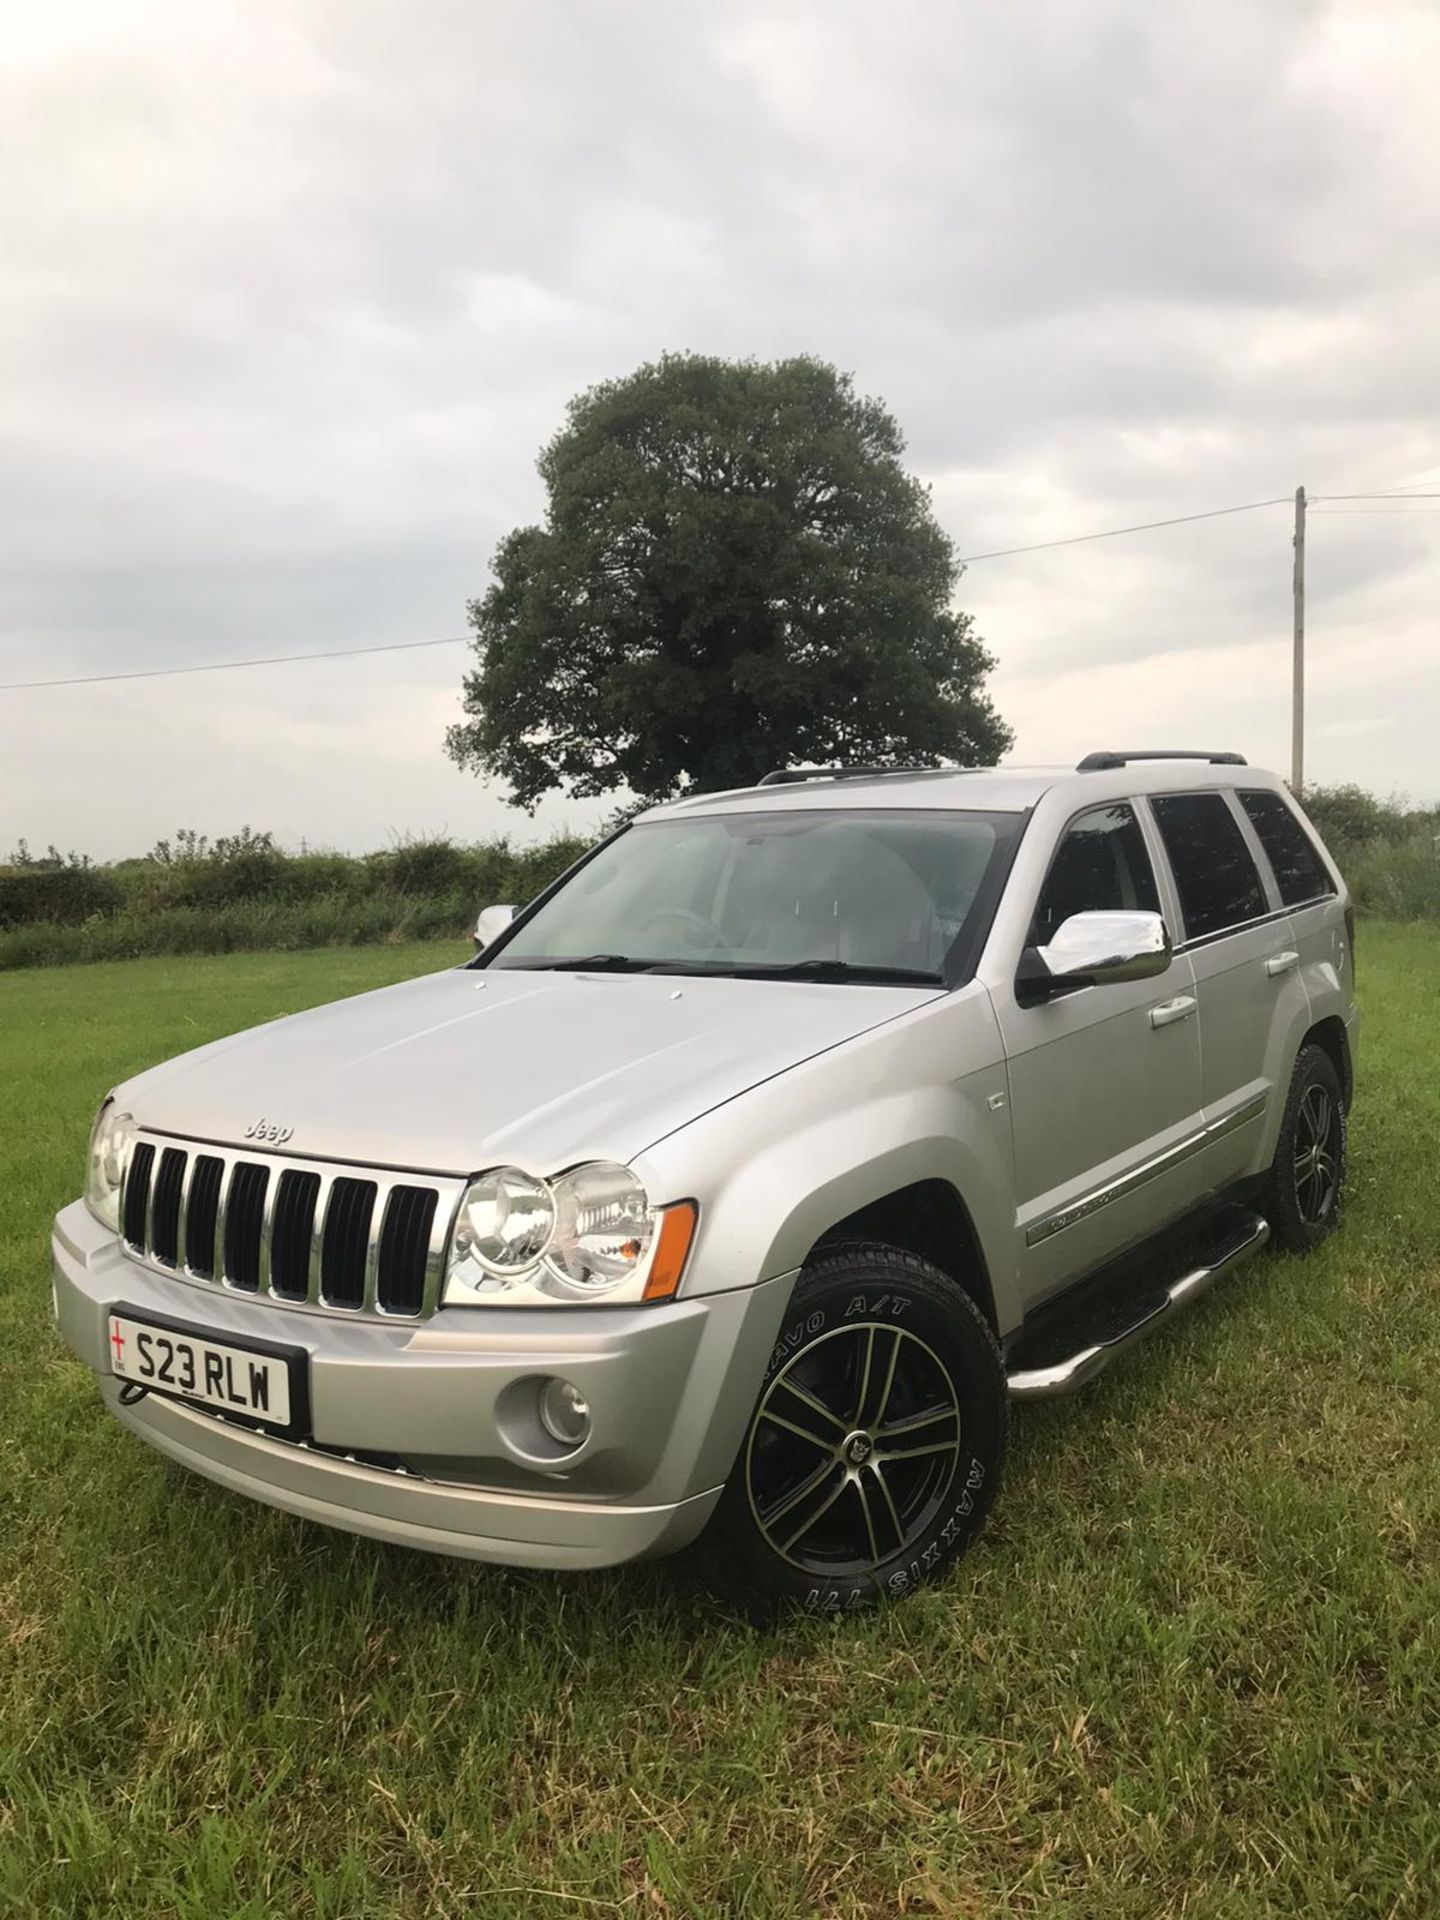 2005/55 REG JEEP GRAND CHEROKEE V6 CRD LIMITED 3.0 DIESEL AUTOMATIC 215 BHP *NO VAT* - Image 3 of 8